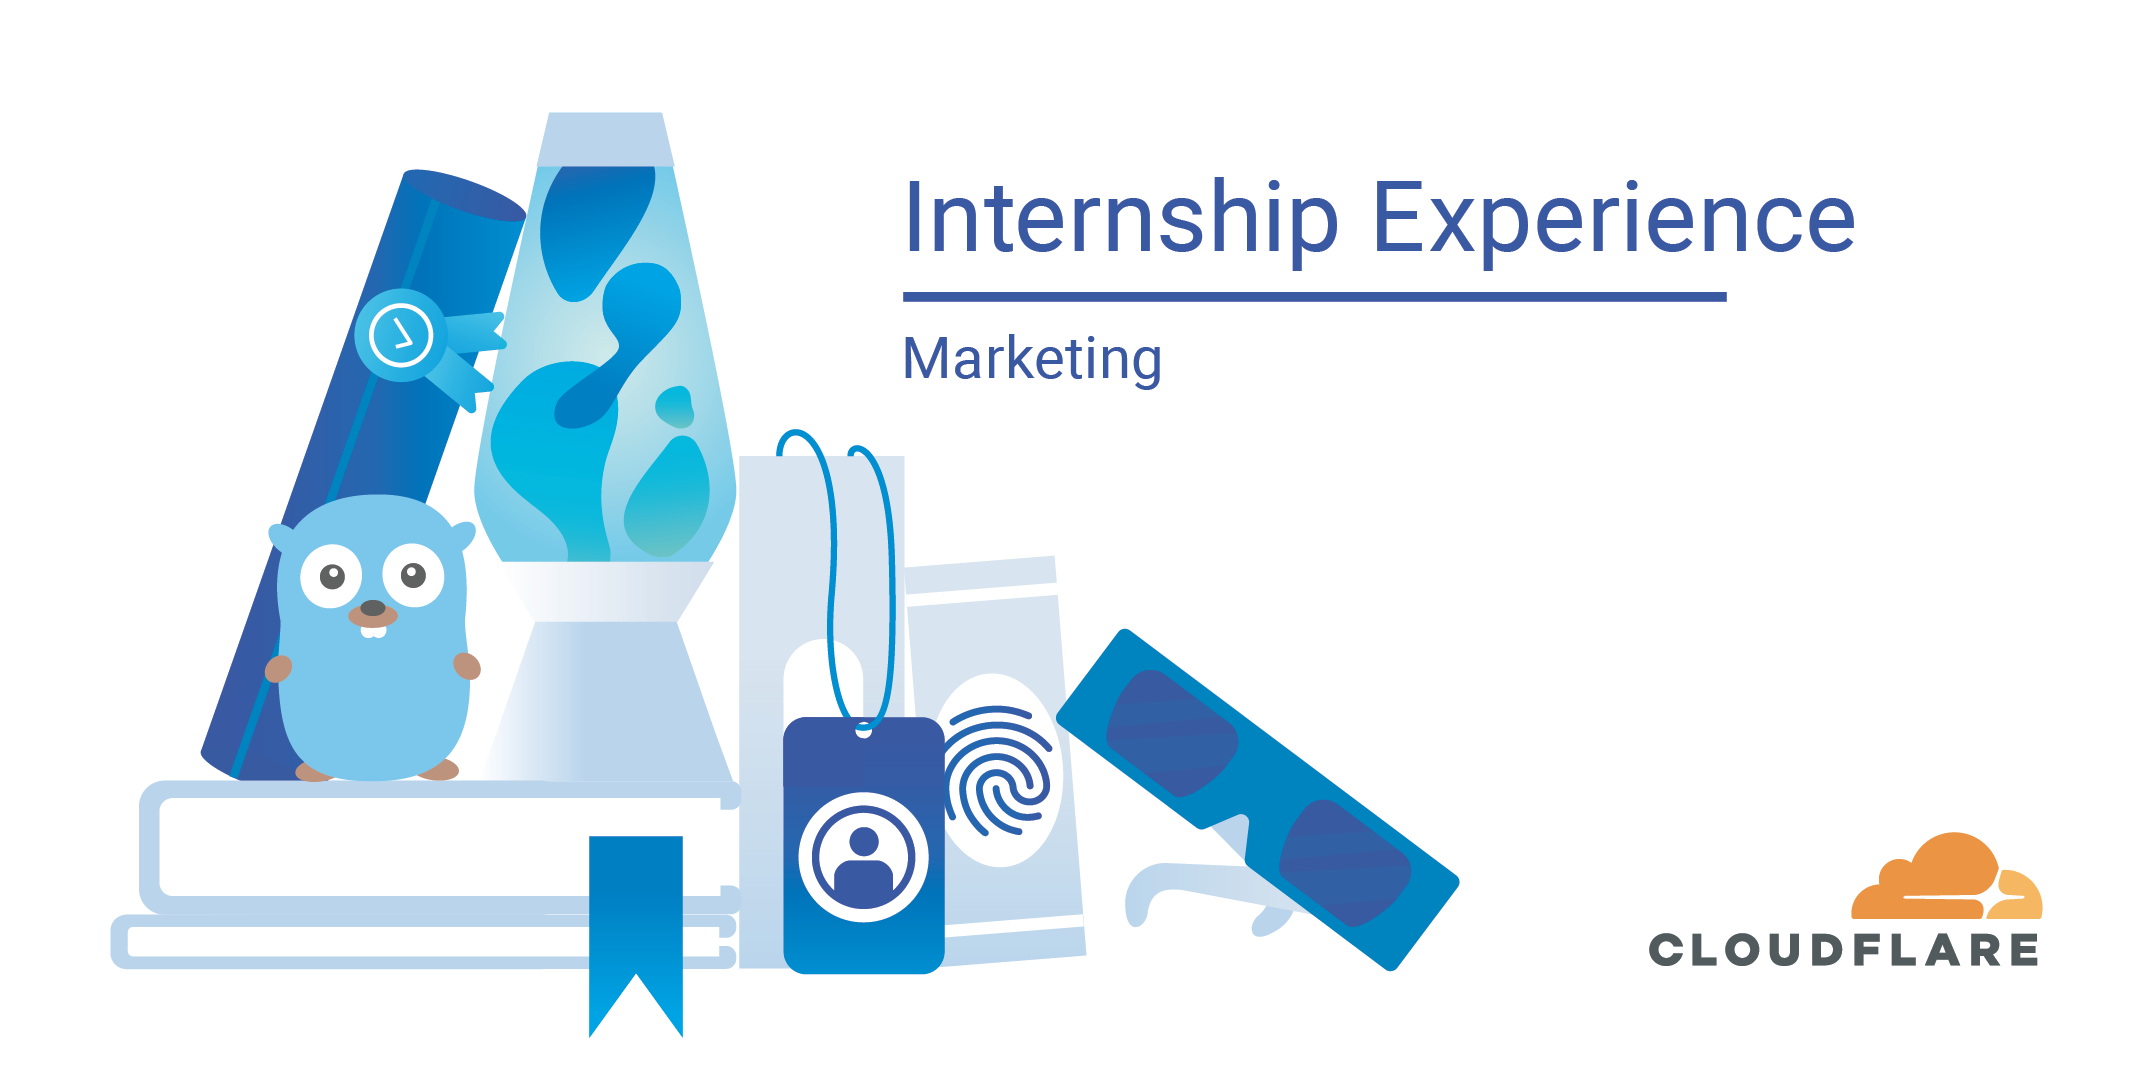 Virtual Interning Offers Unique Challenges and Opportunities